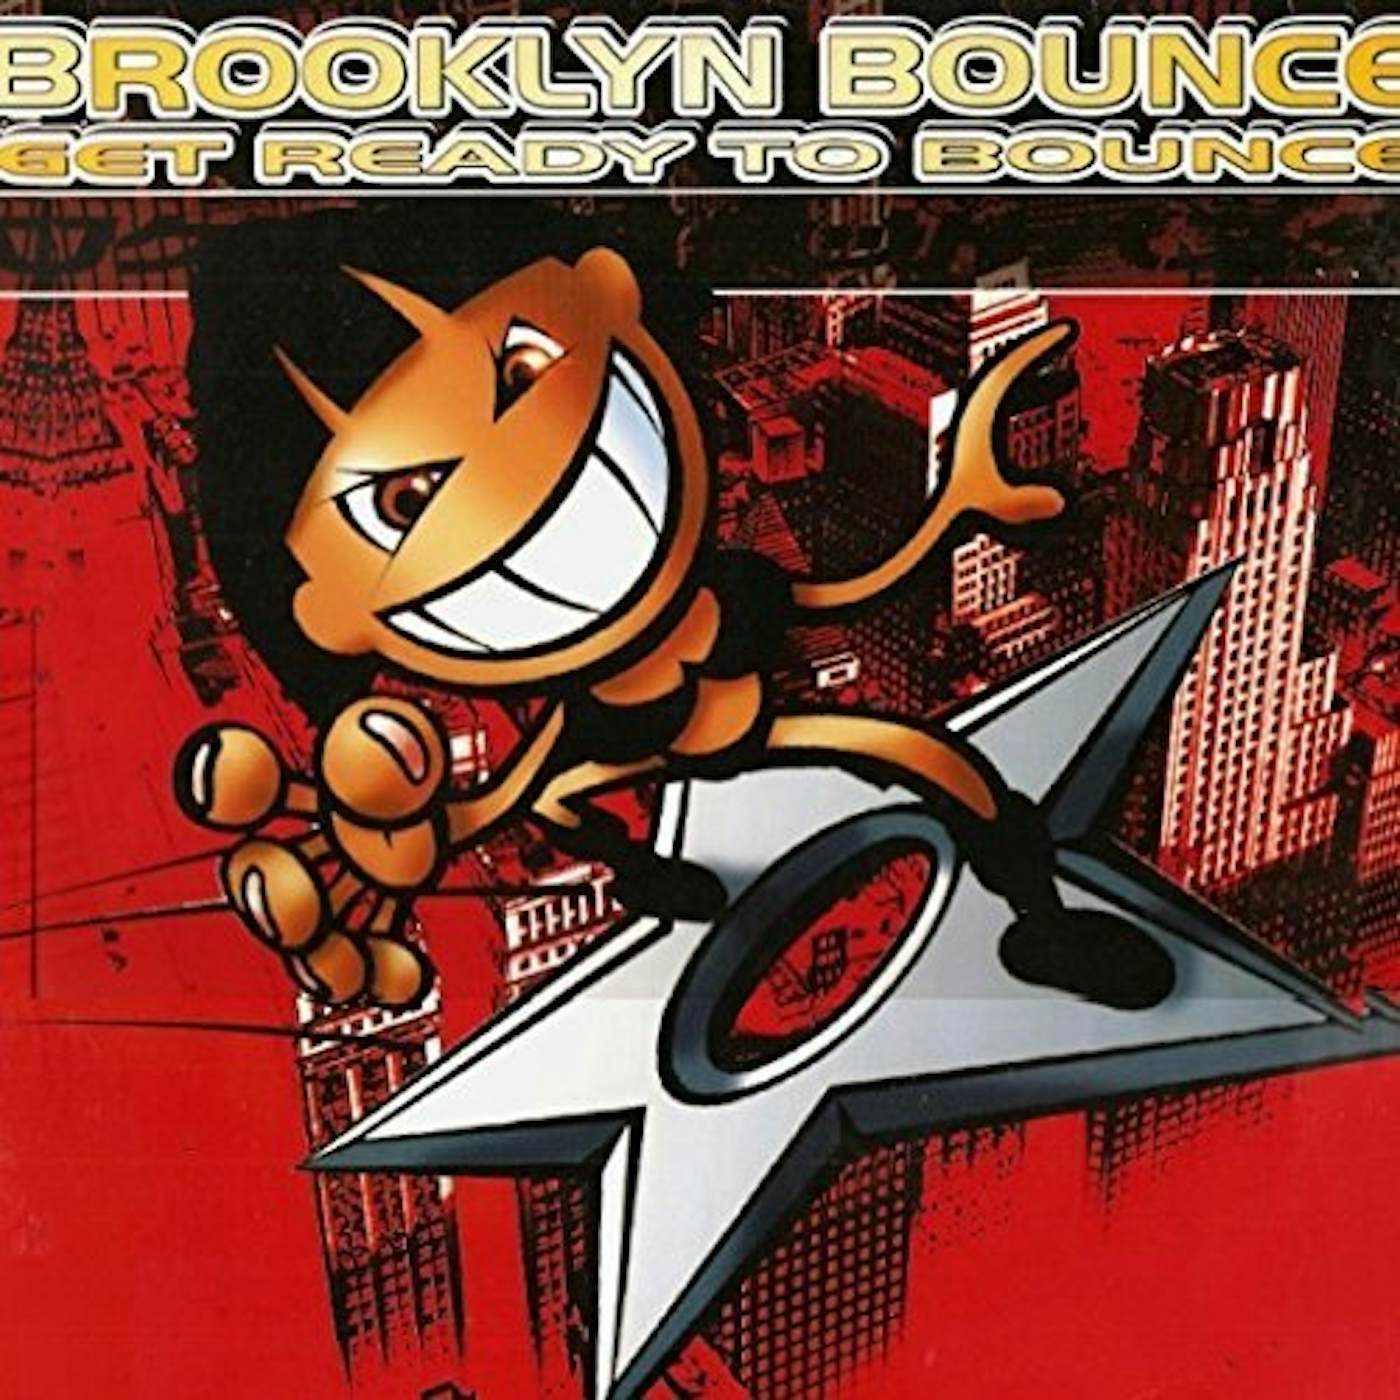 Brooklyn Bounce Get Ready to Bounce Vinyl Record